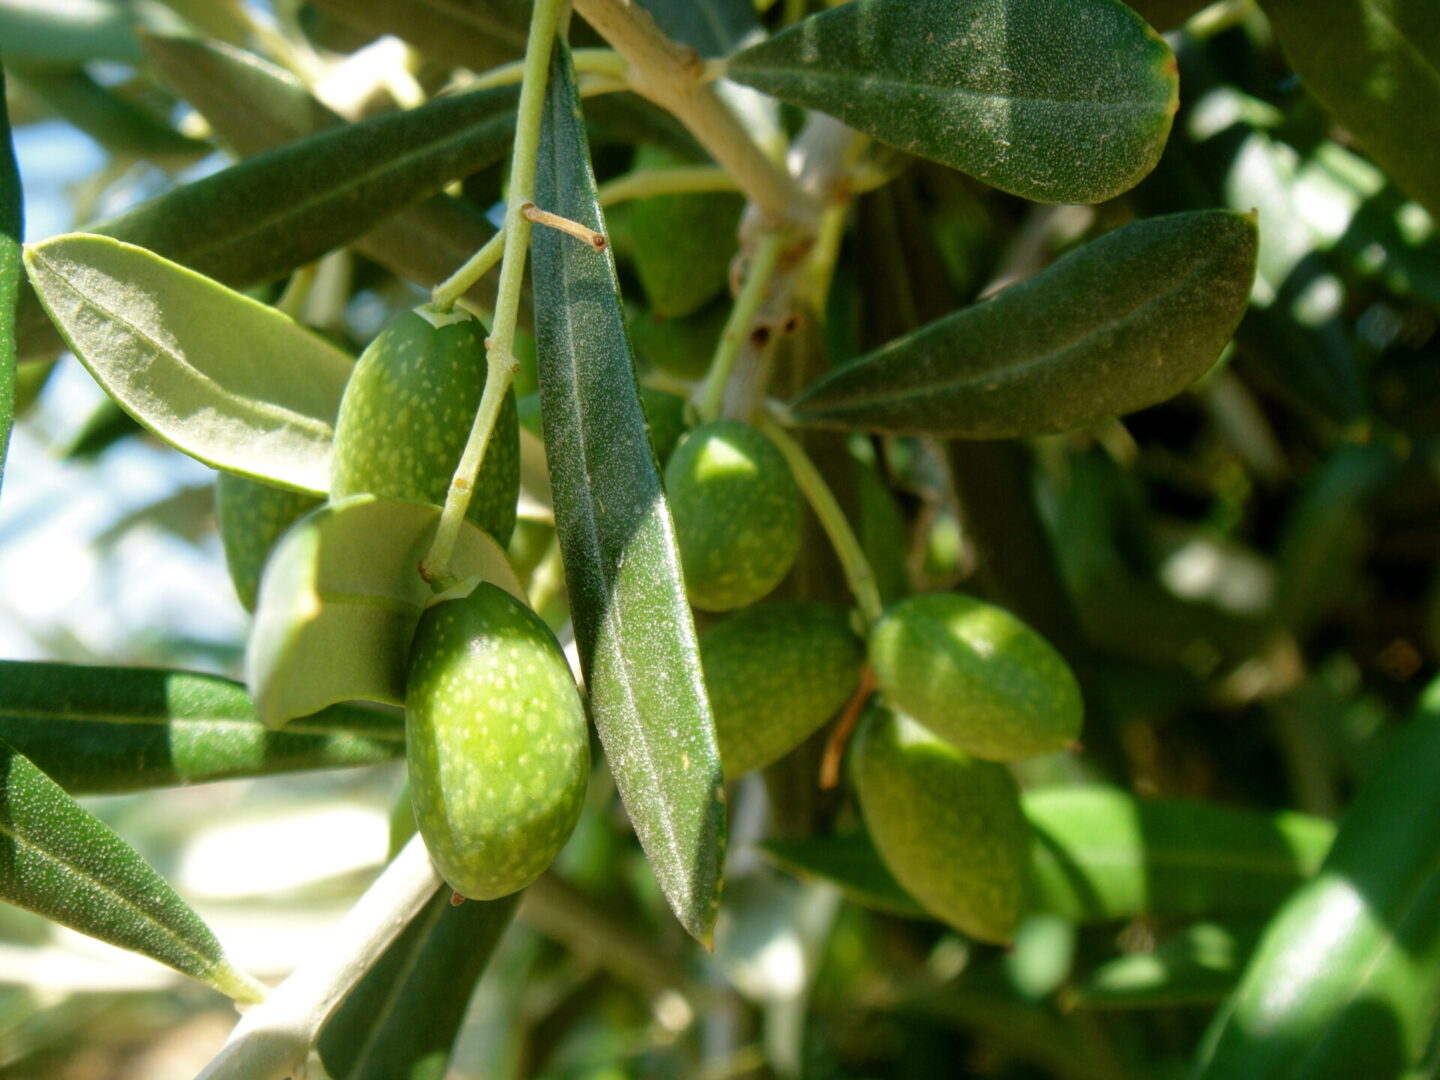 A close up of some green olives on the tree